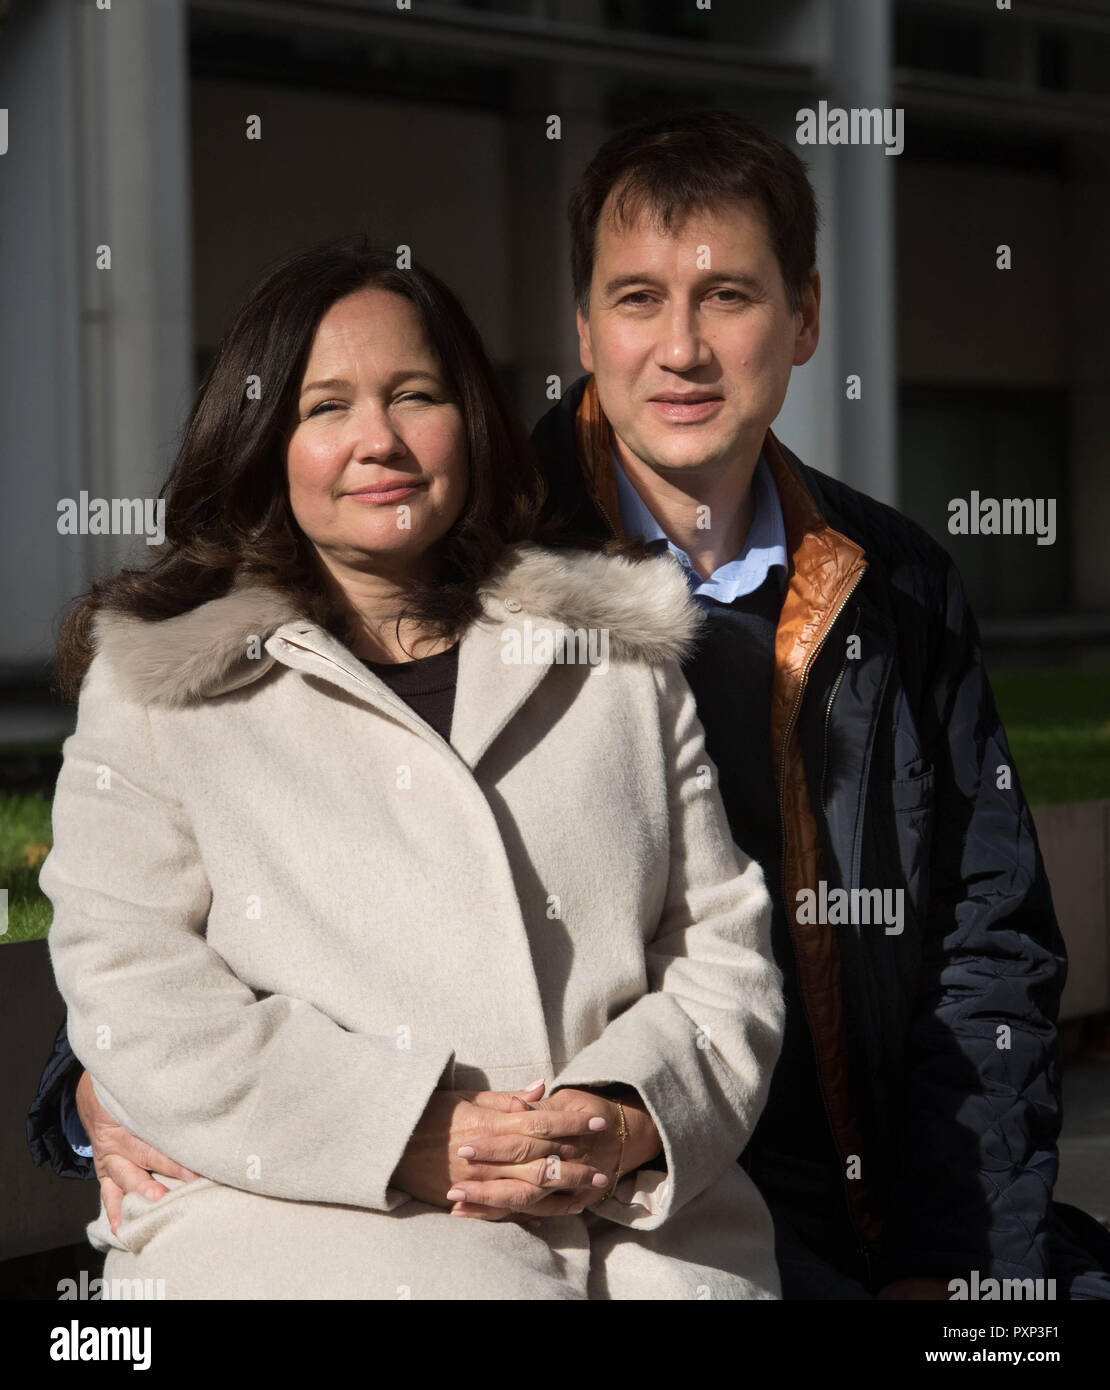 Nadim and Tanya Ednan-Laperouse, the parents of 15 year old Natasha who died after eating a Pret A Manger sandwich, after meeting with Environment secretary Michael Gove in central London, where they called for a law change requiring all foods to be labelled clearly with any allergens. Stock Photo